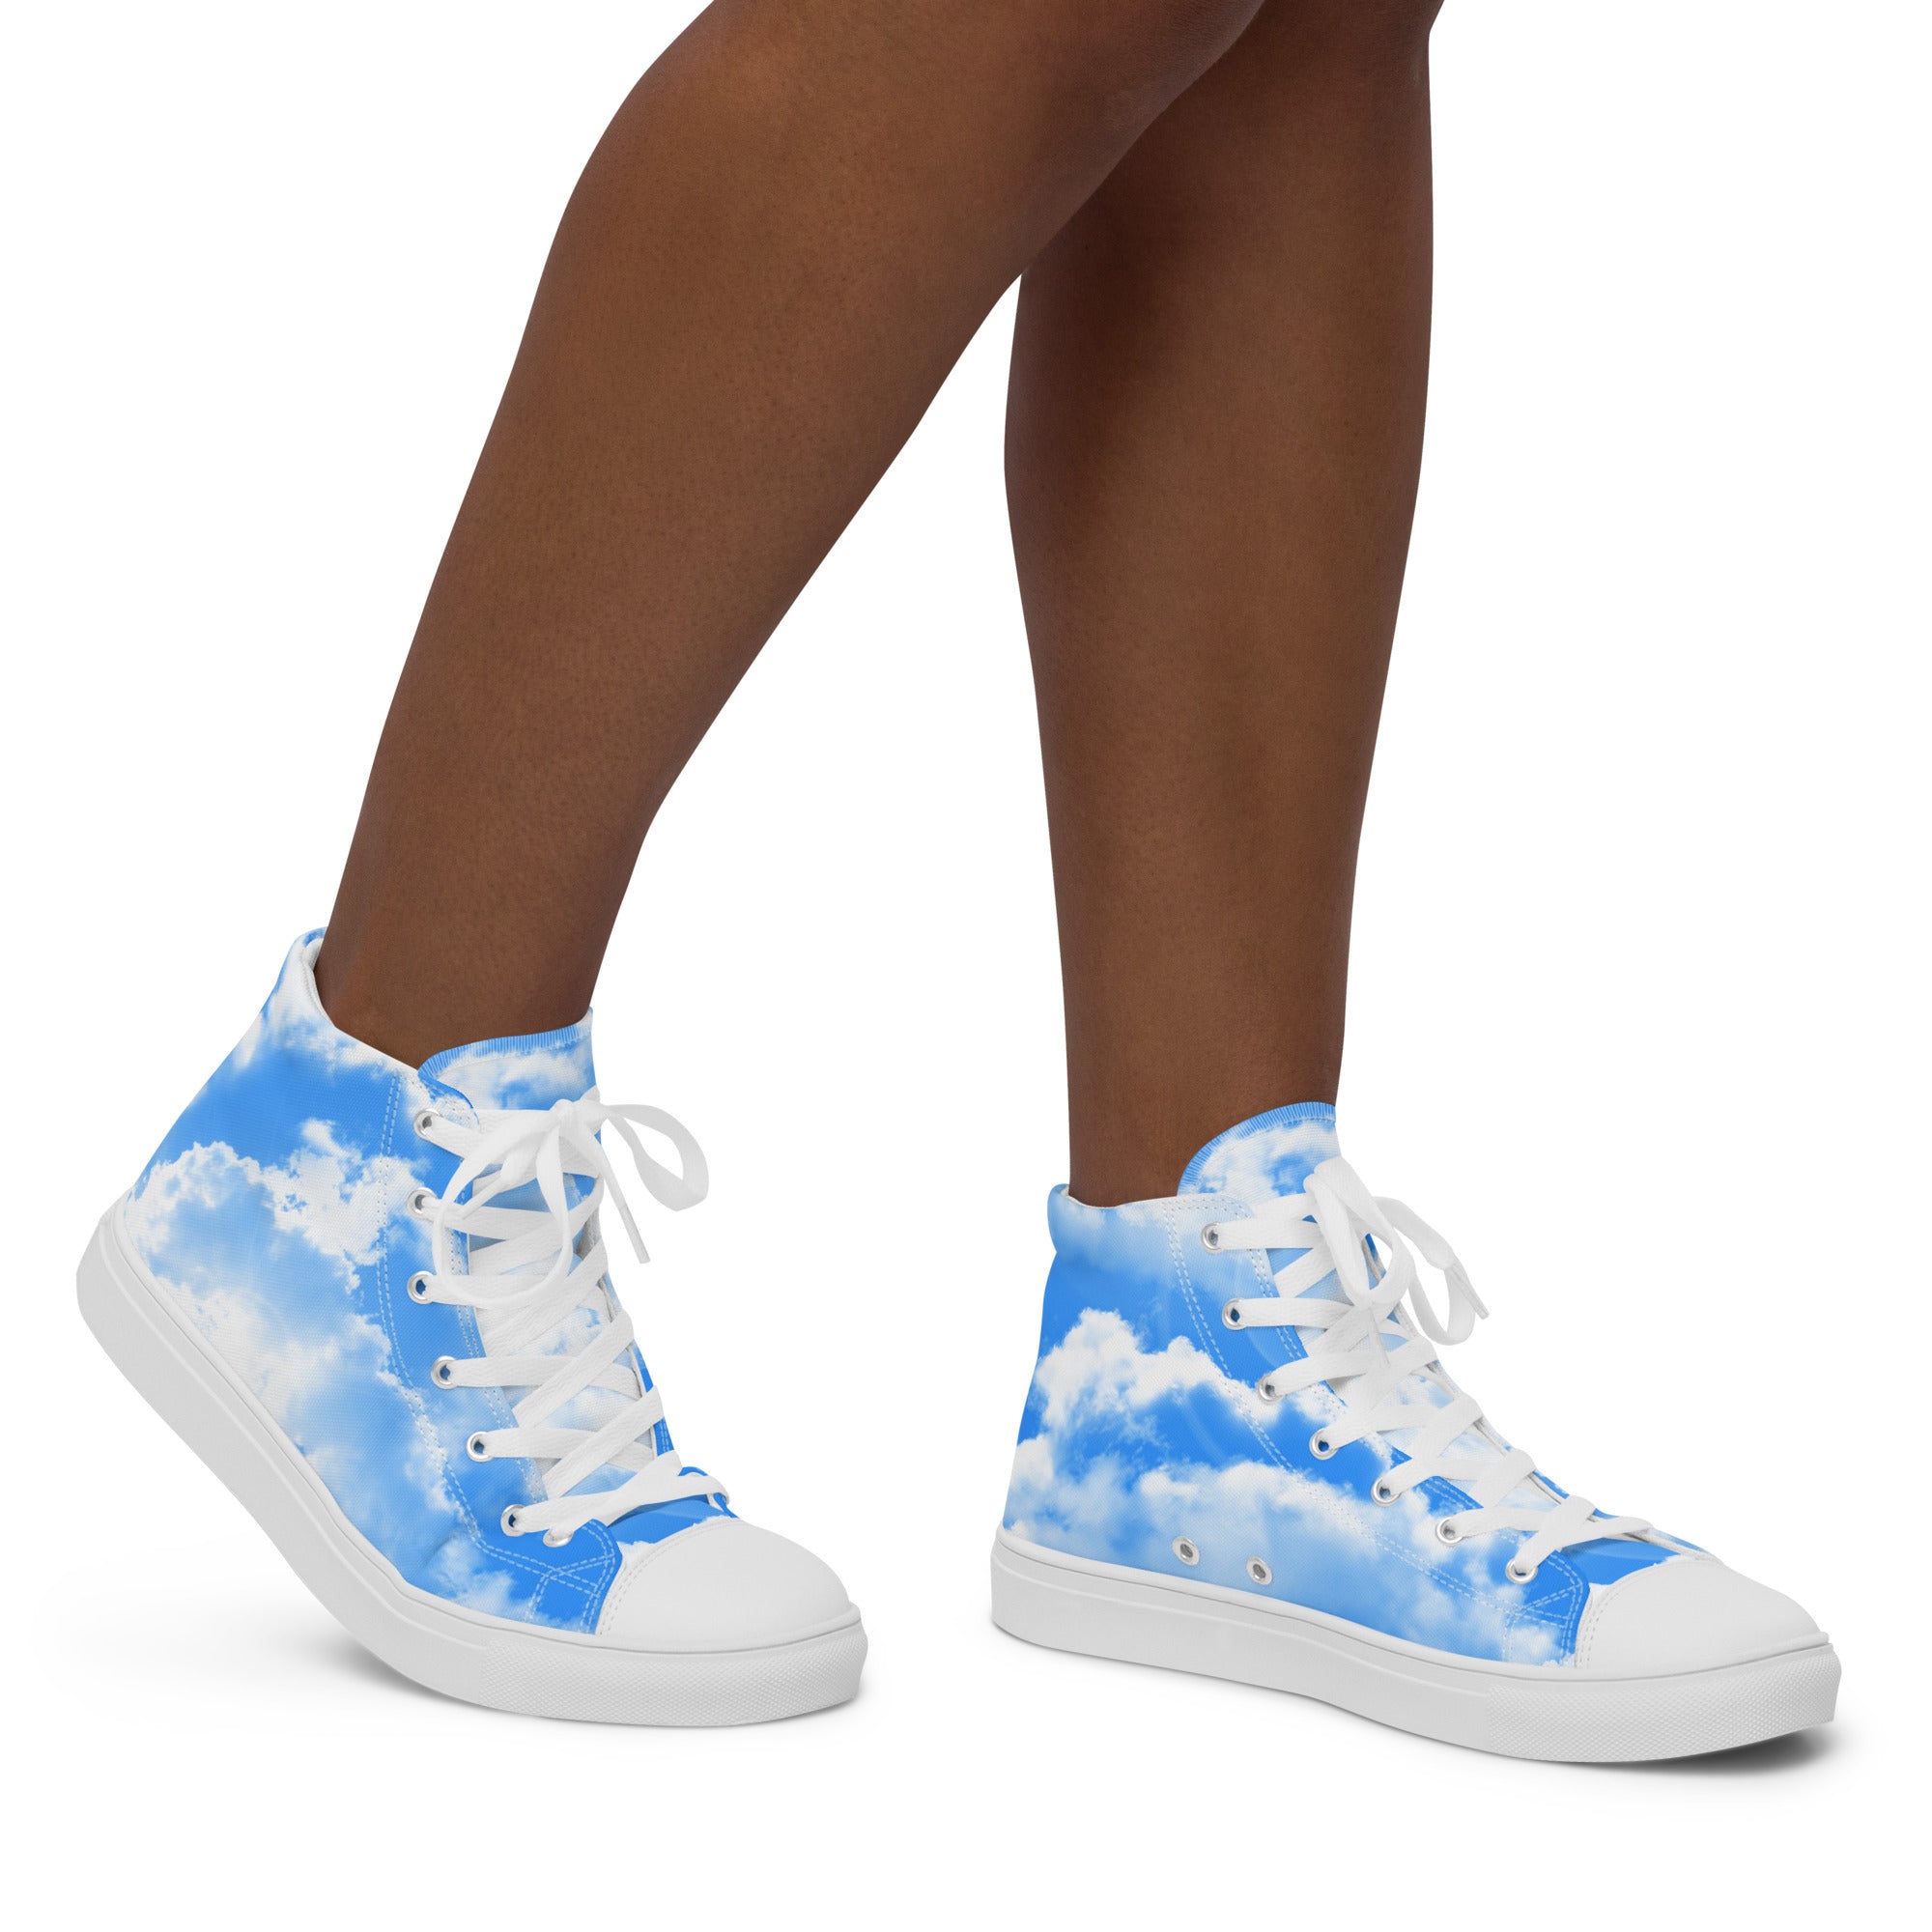 Walking On Clouds Women’s High Top Shoes